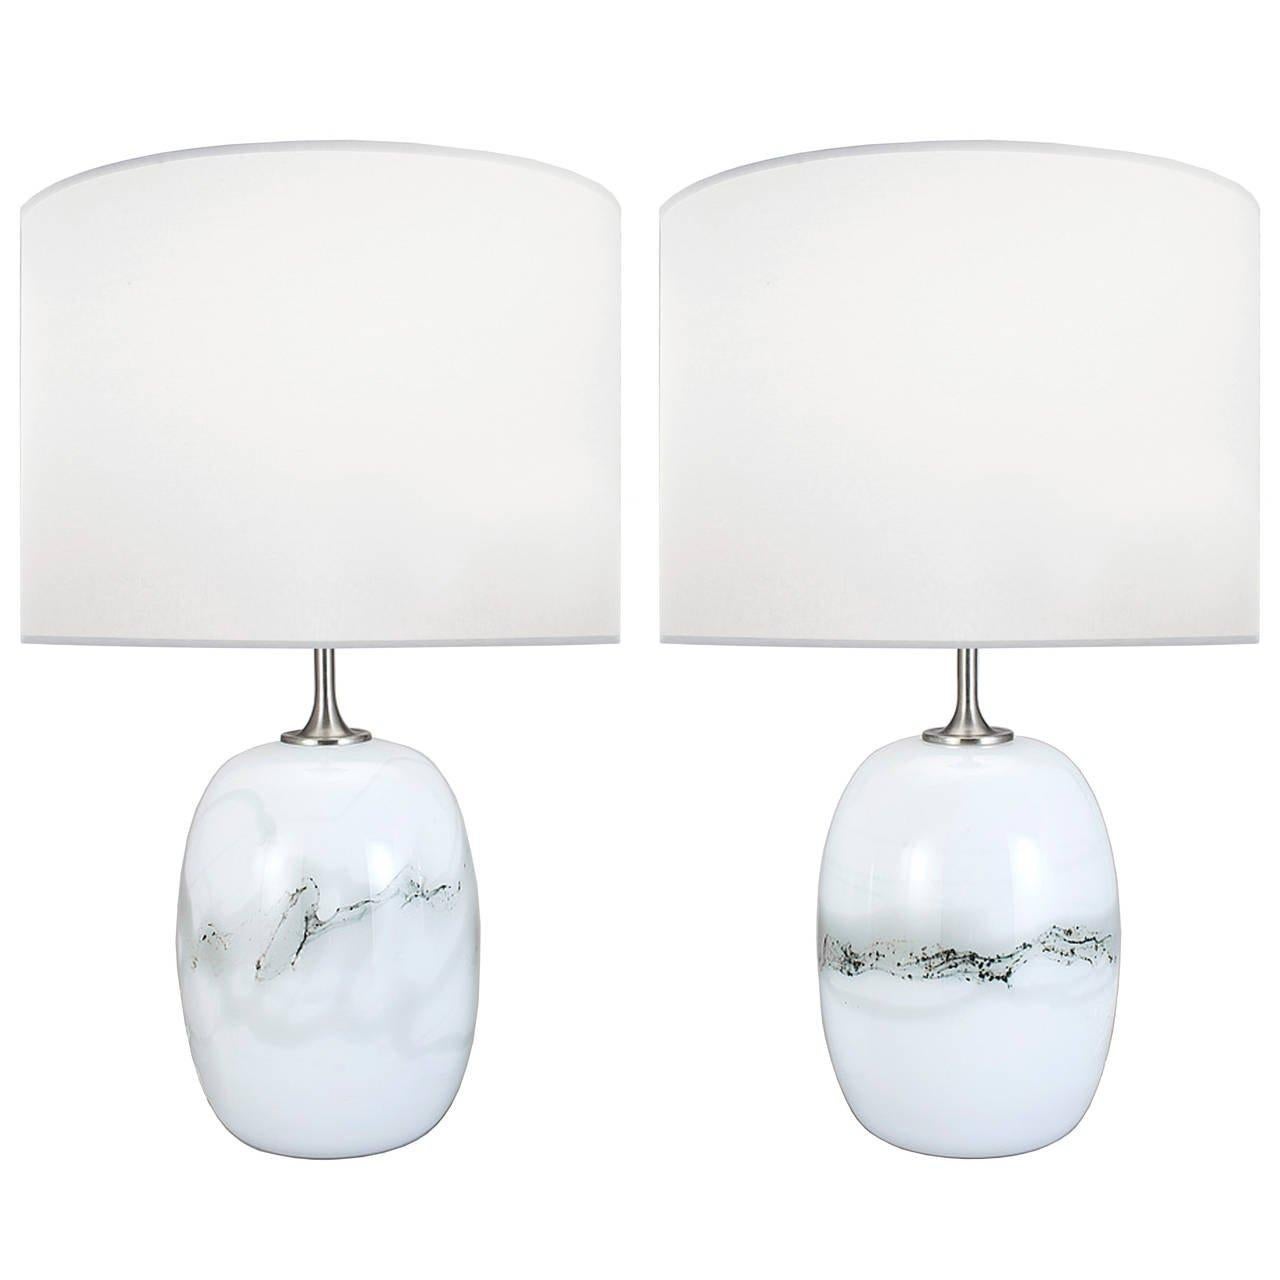 A pair of white glass lamps with gray modeling and nickel hardware by Holmegaard.

Denmark, Circa 1960's

Lamp Shades Are Not Included.

If you are interested in Lamp Shades, please email The Craig Van Den Brulle Design Team Via Message Center, and